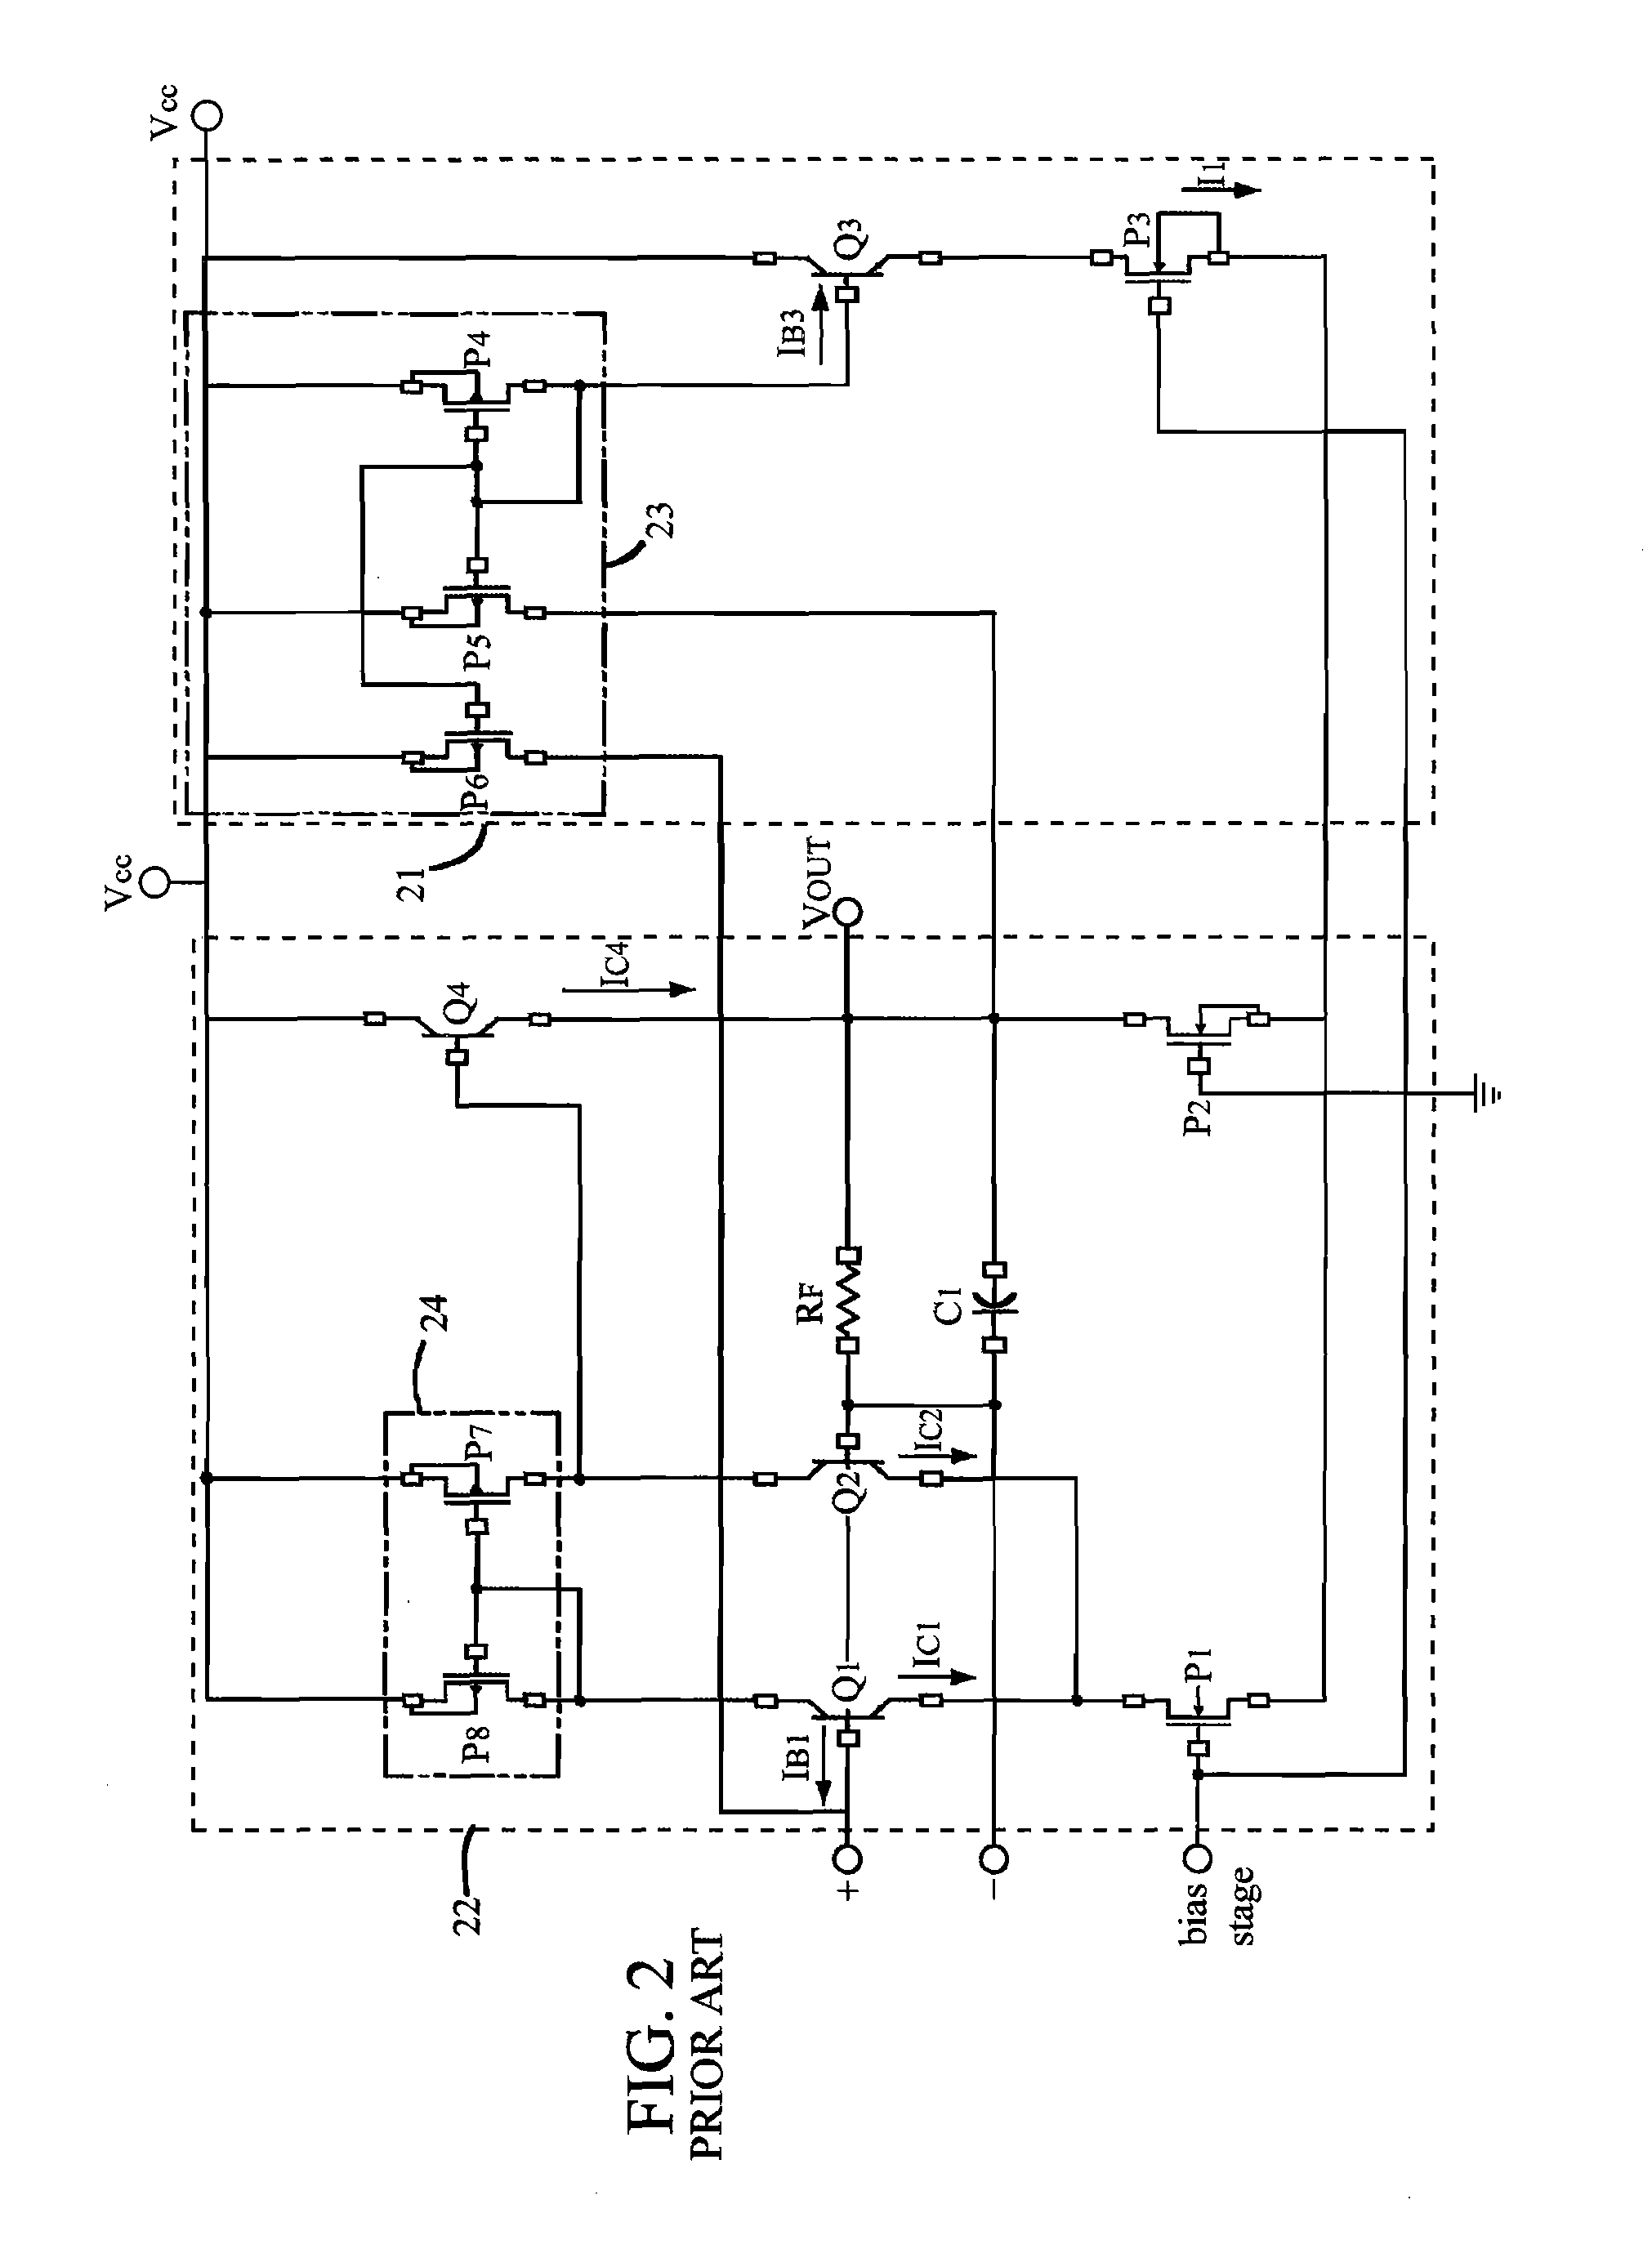 Circuit and method for compensating for offset voltage